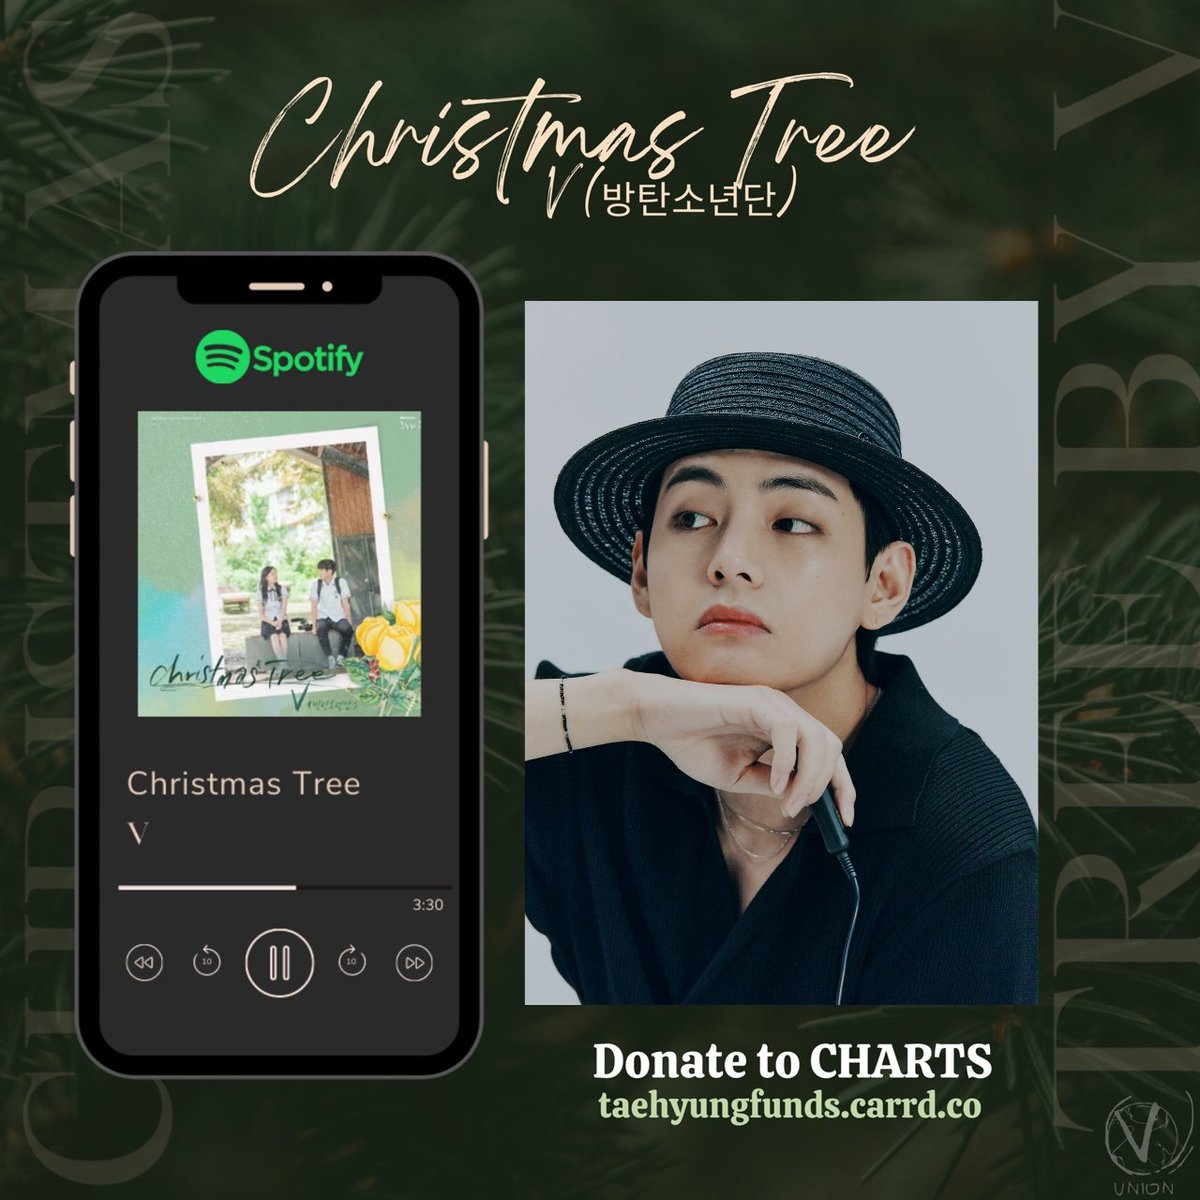 .@MnetMAMA: Best OST Nominee ‘Christmas Tree’ by V was “The First OST that charted on the Billboard 100”